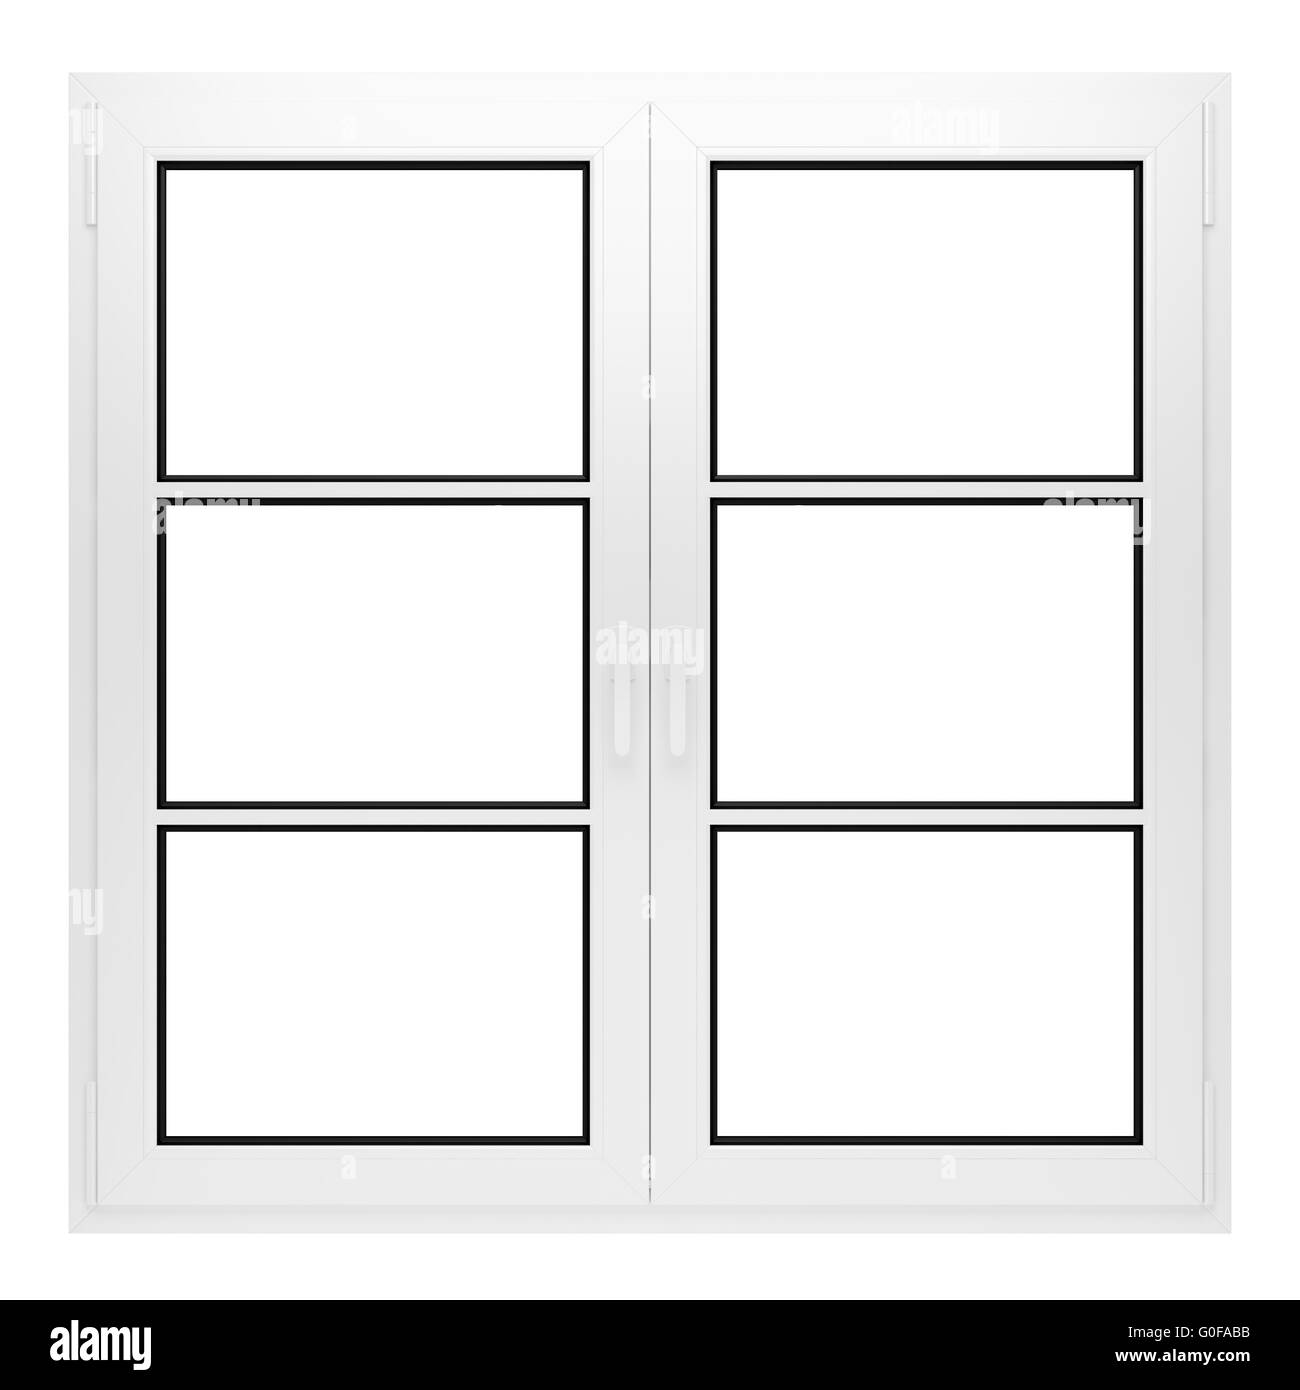 Closed the window Black and White Stock Photos & Images - Alamy